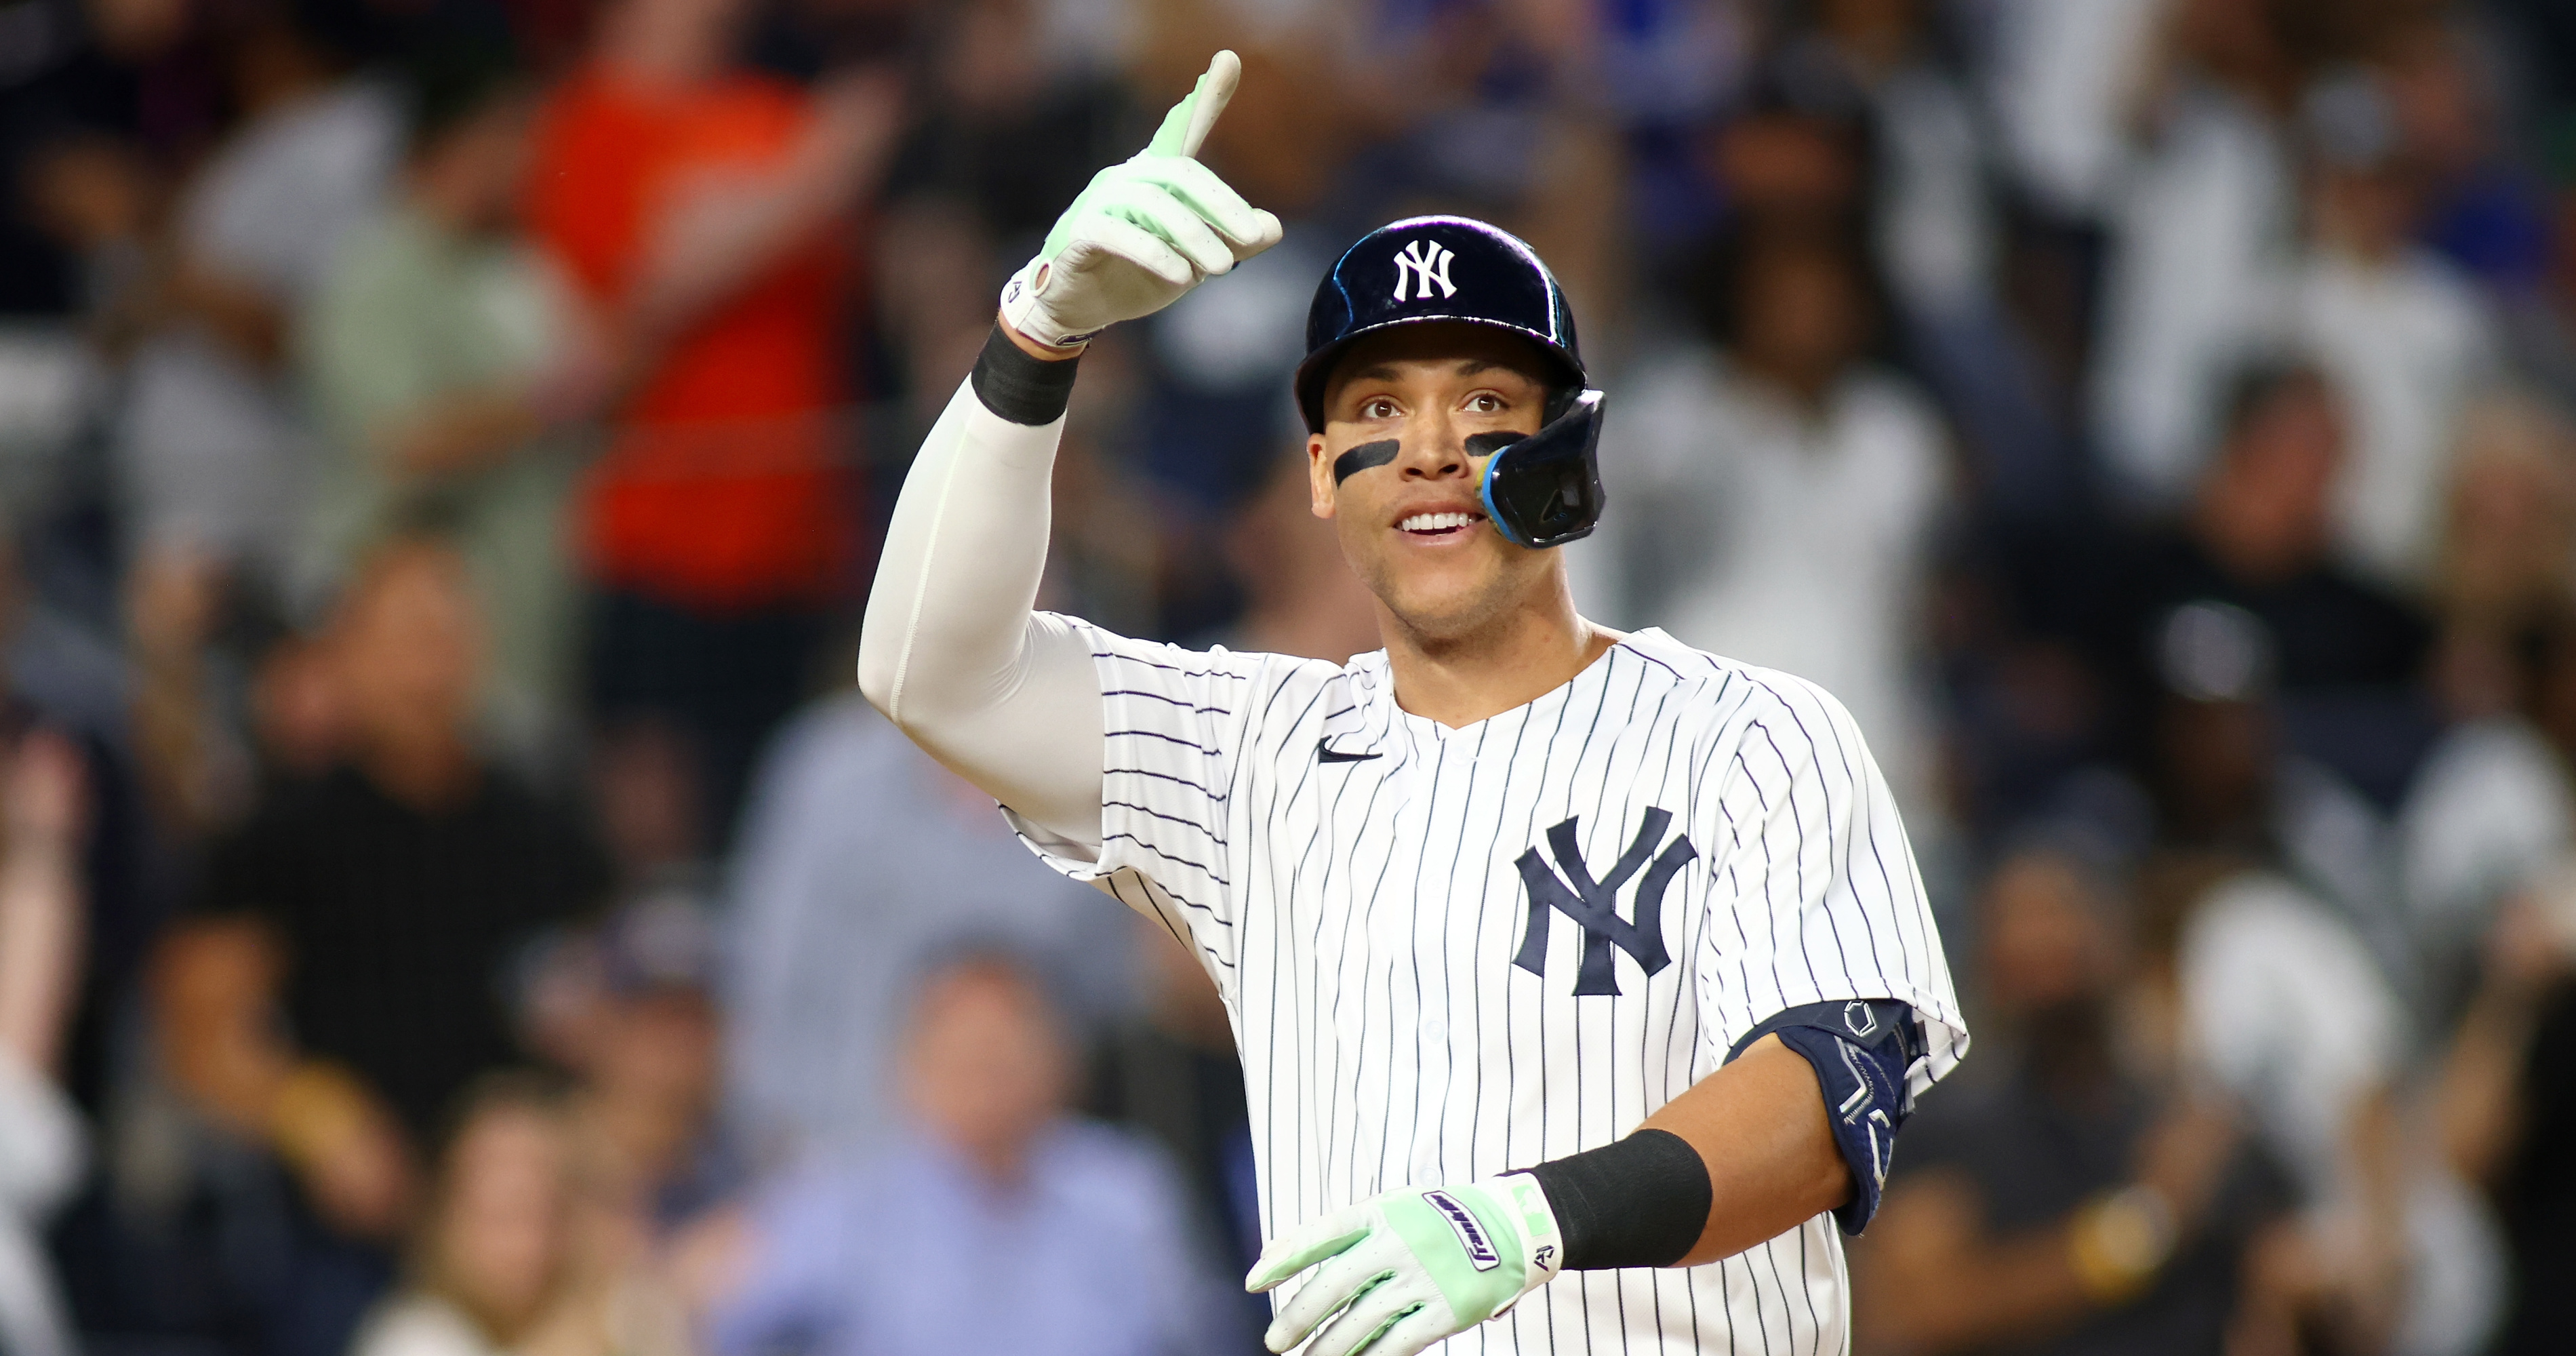 The Yankees were lucky to have a healthy and in-form Judge in 2021